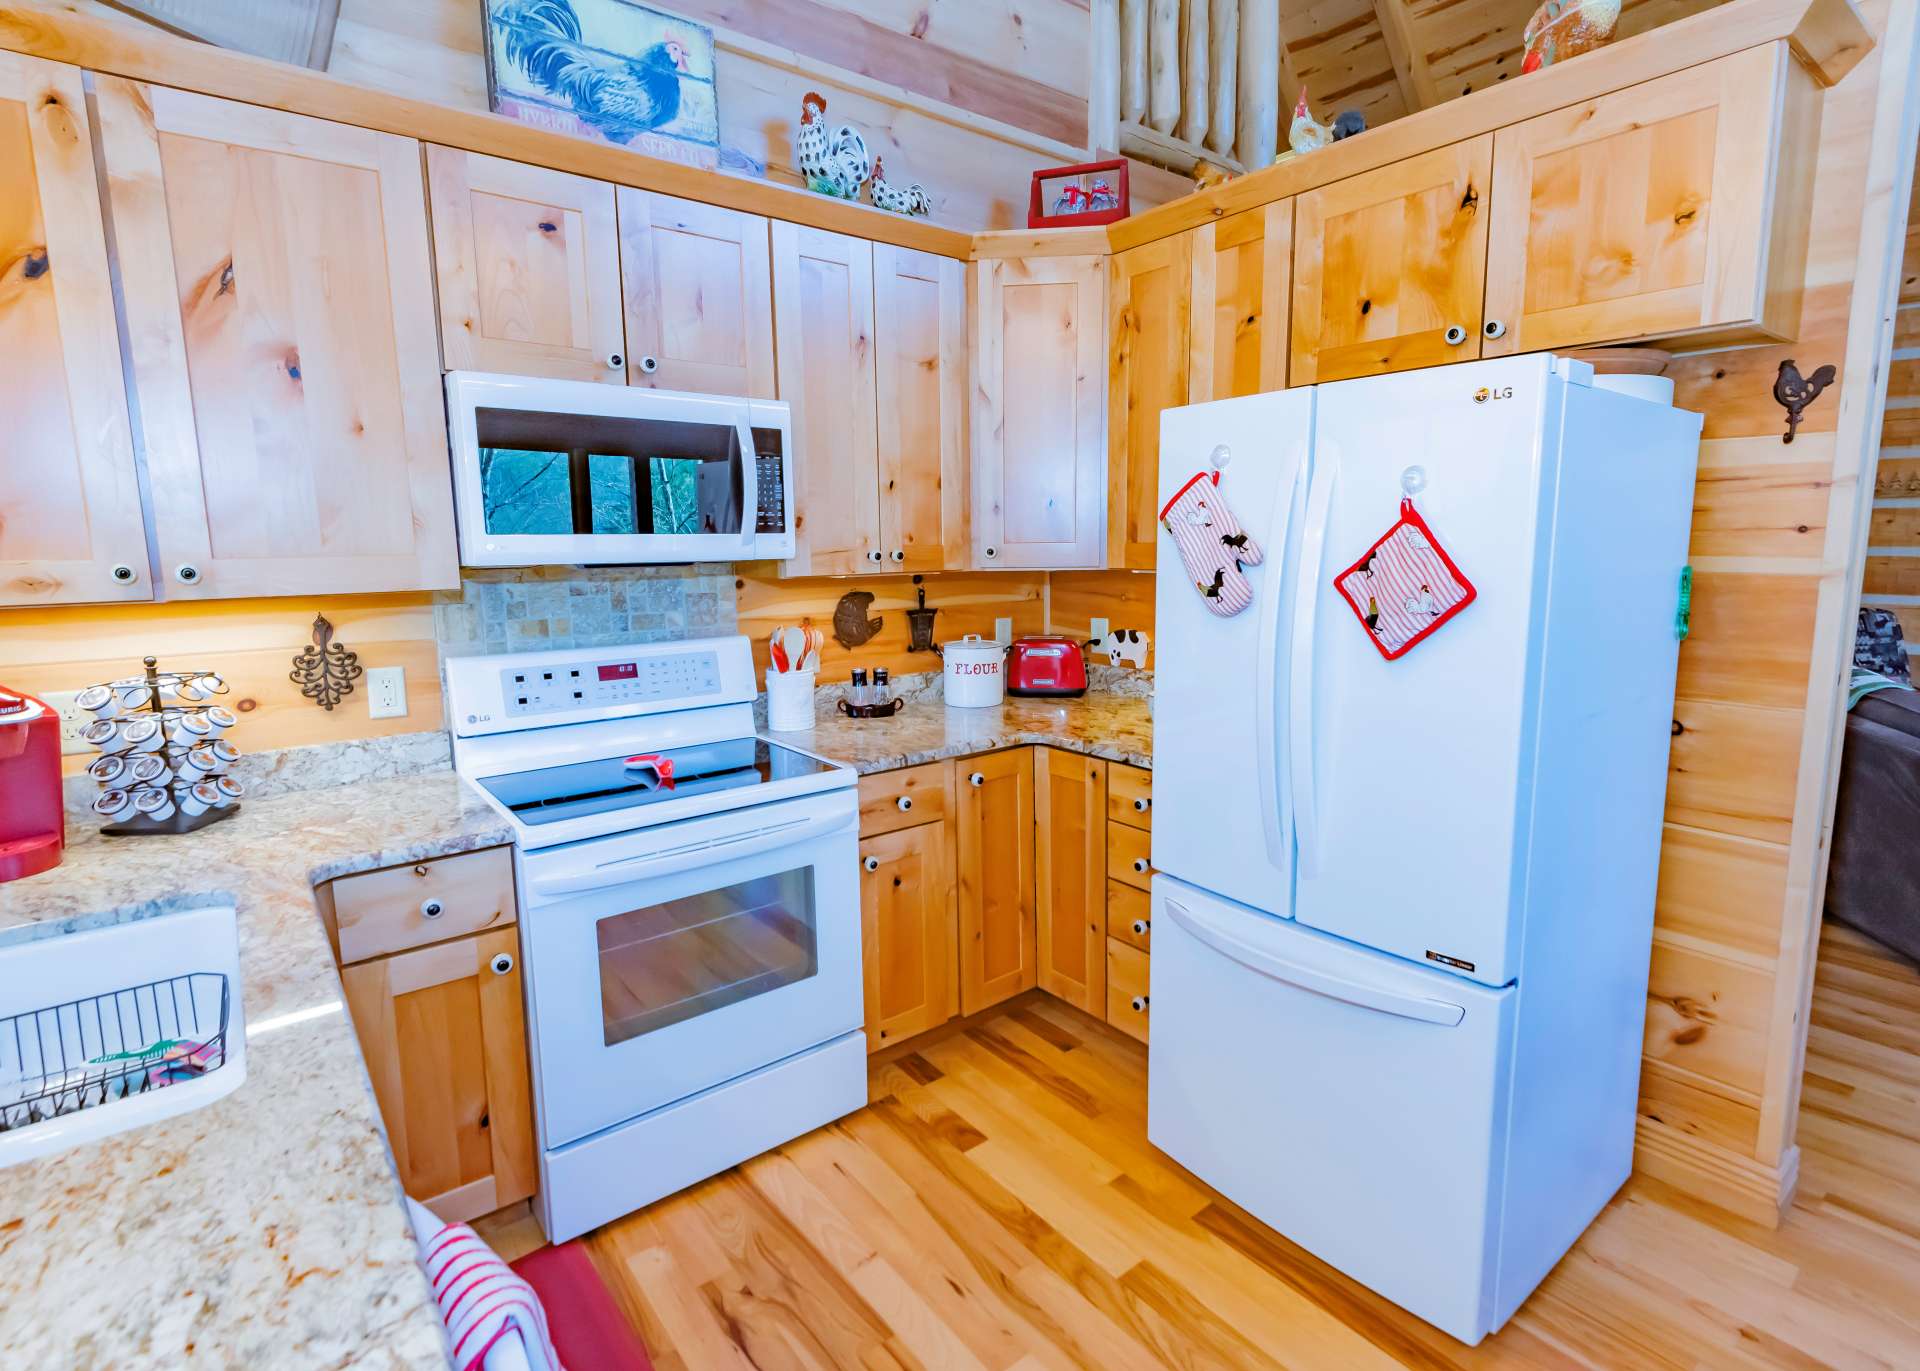 This charming kitchen offers ample work and storage space and is open to the dining area.